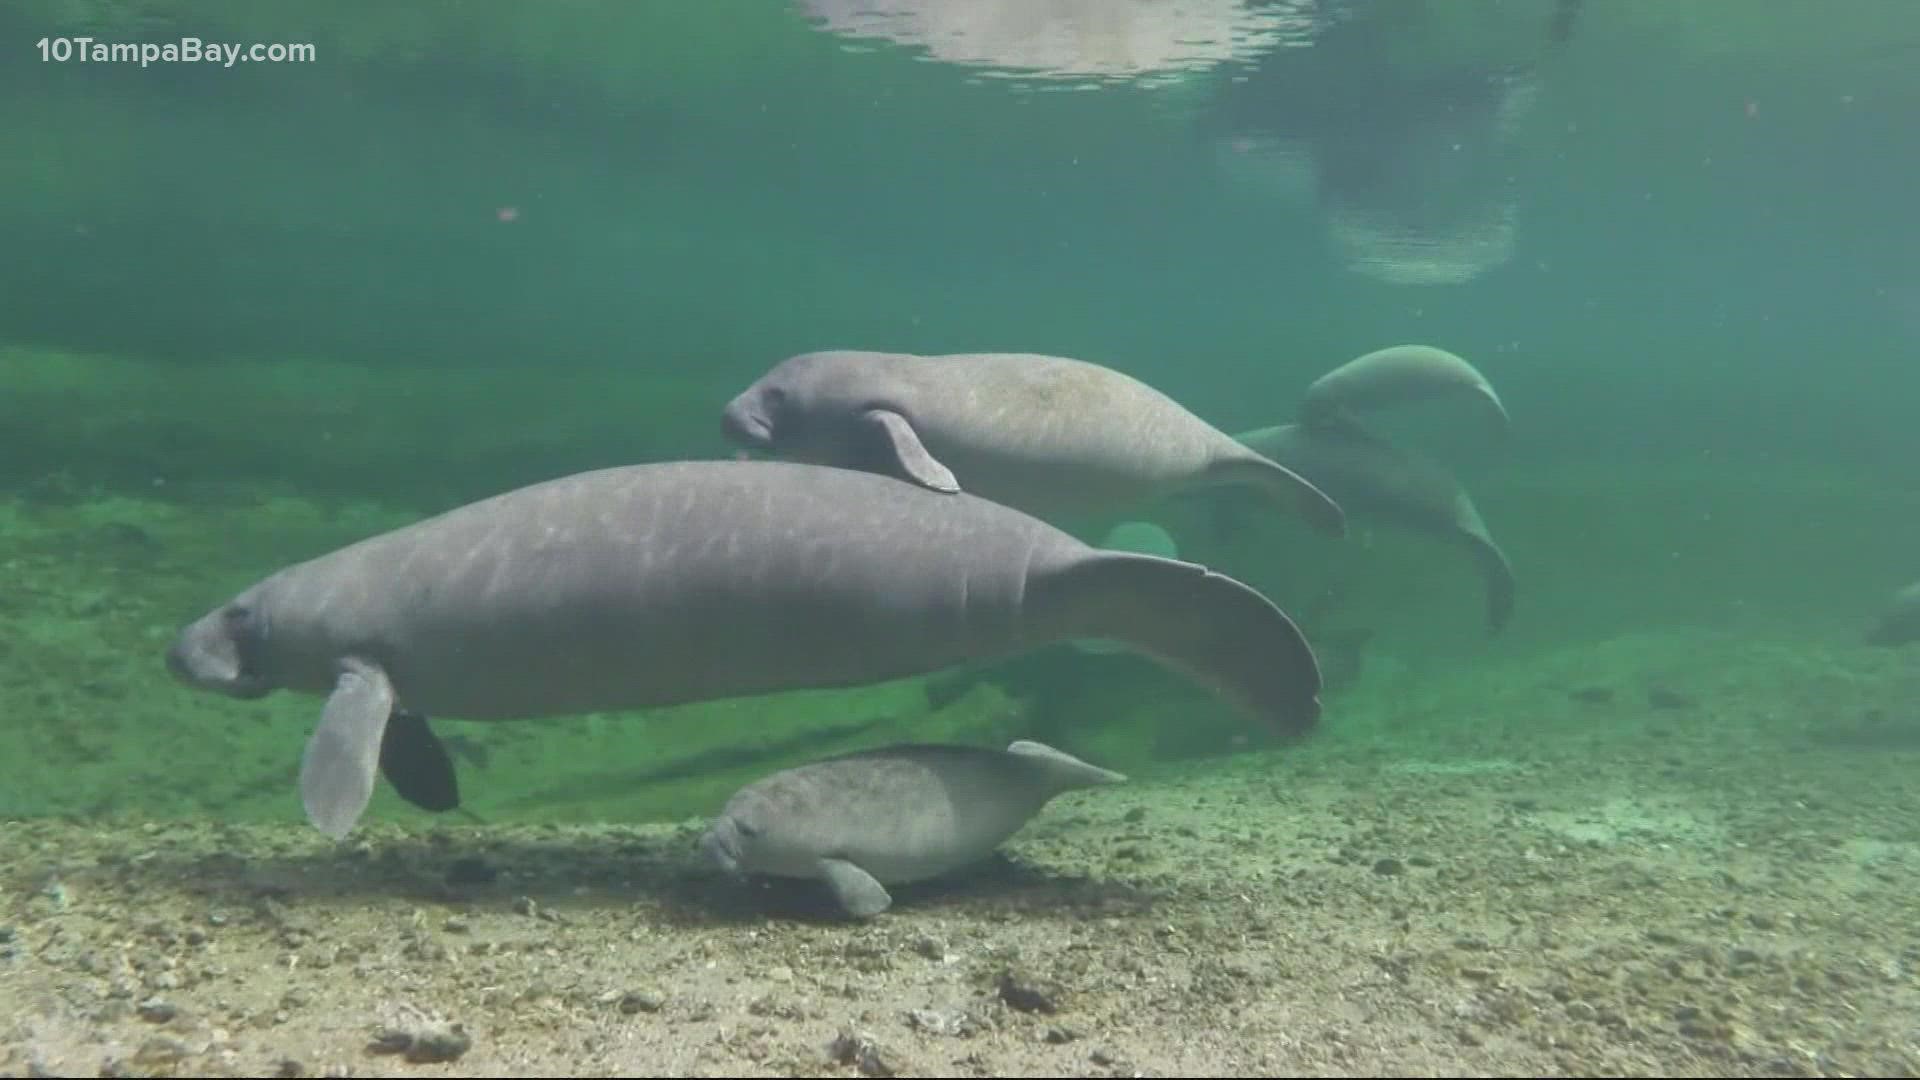 FWC says the unprecedented feeding program is a state and federal response to last year’s record number of manatee deaths.